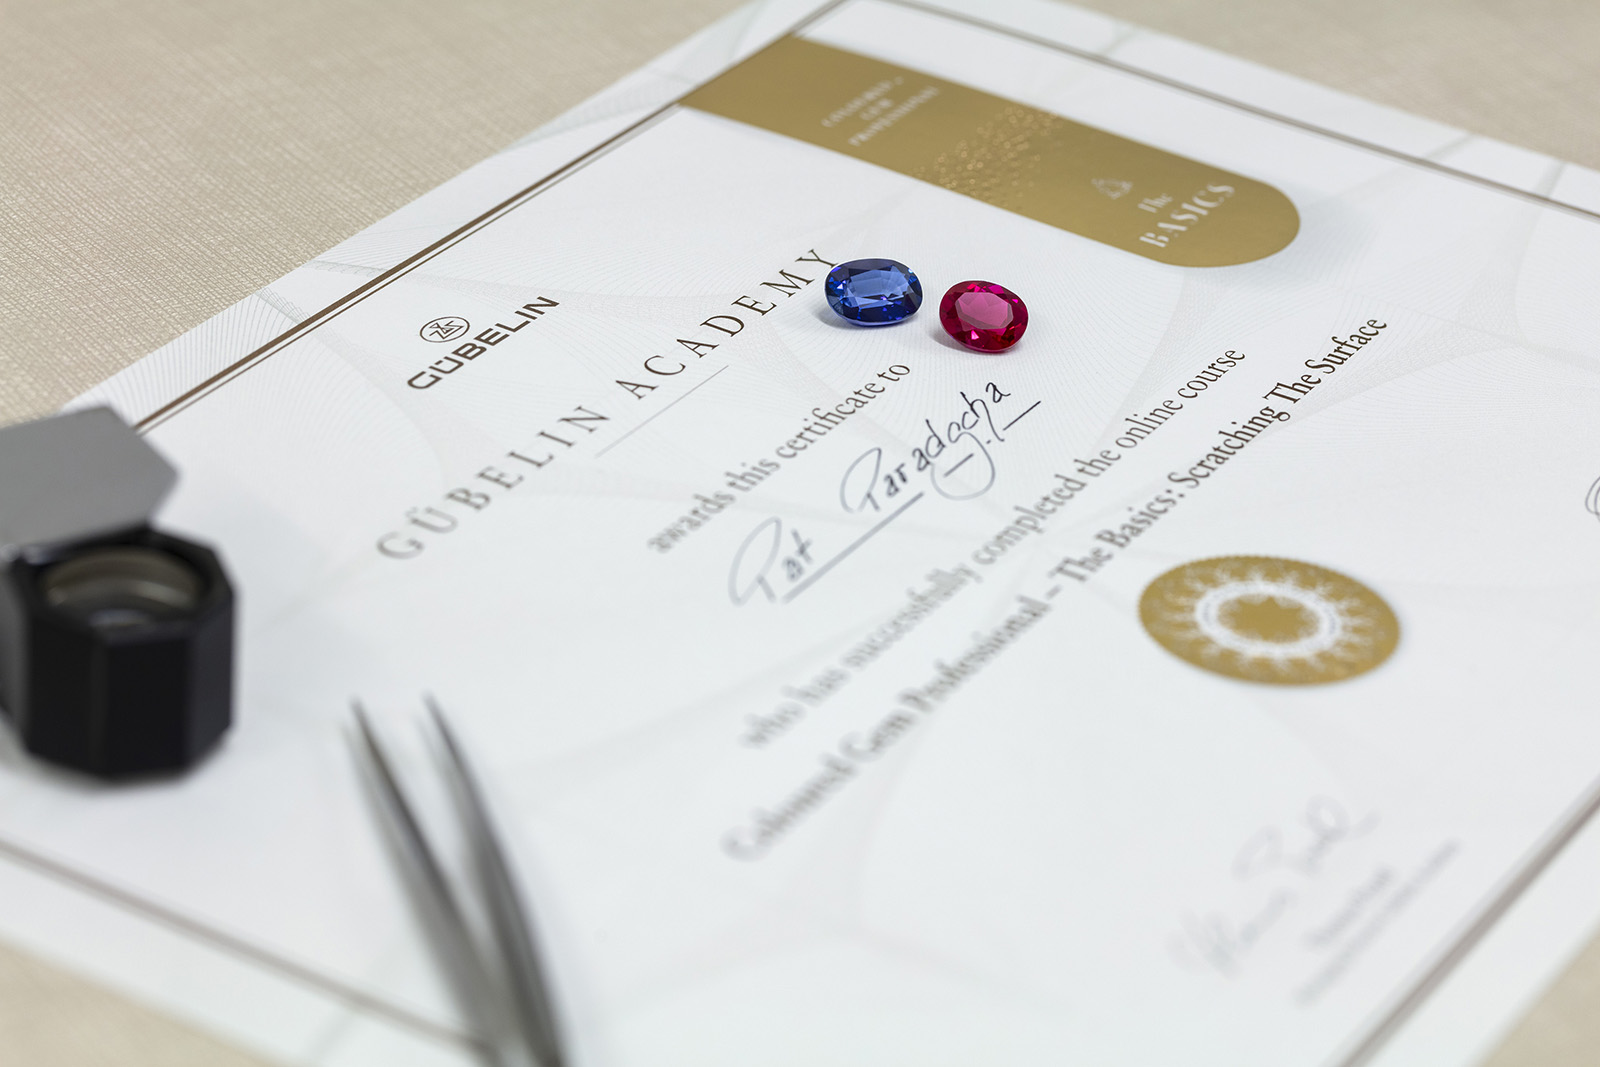 Students who complete the Gübelin Academy ‘The Basics’ online course can progress on to intermediate and advanced level courses 